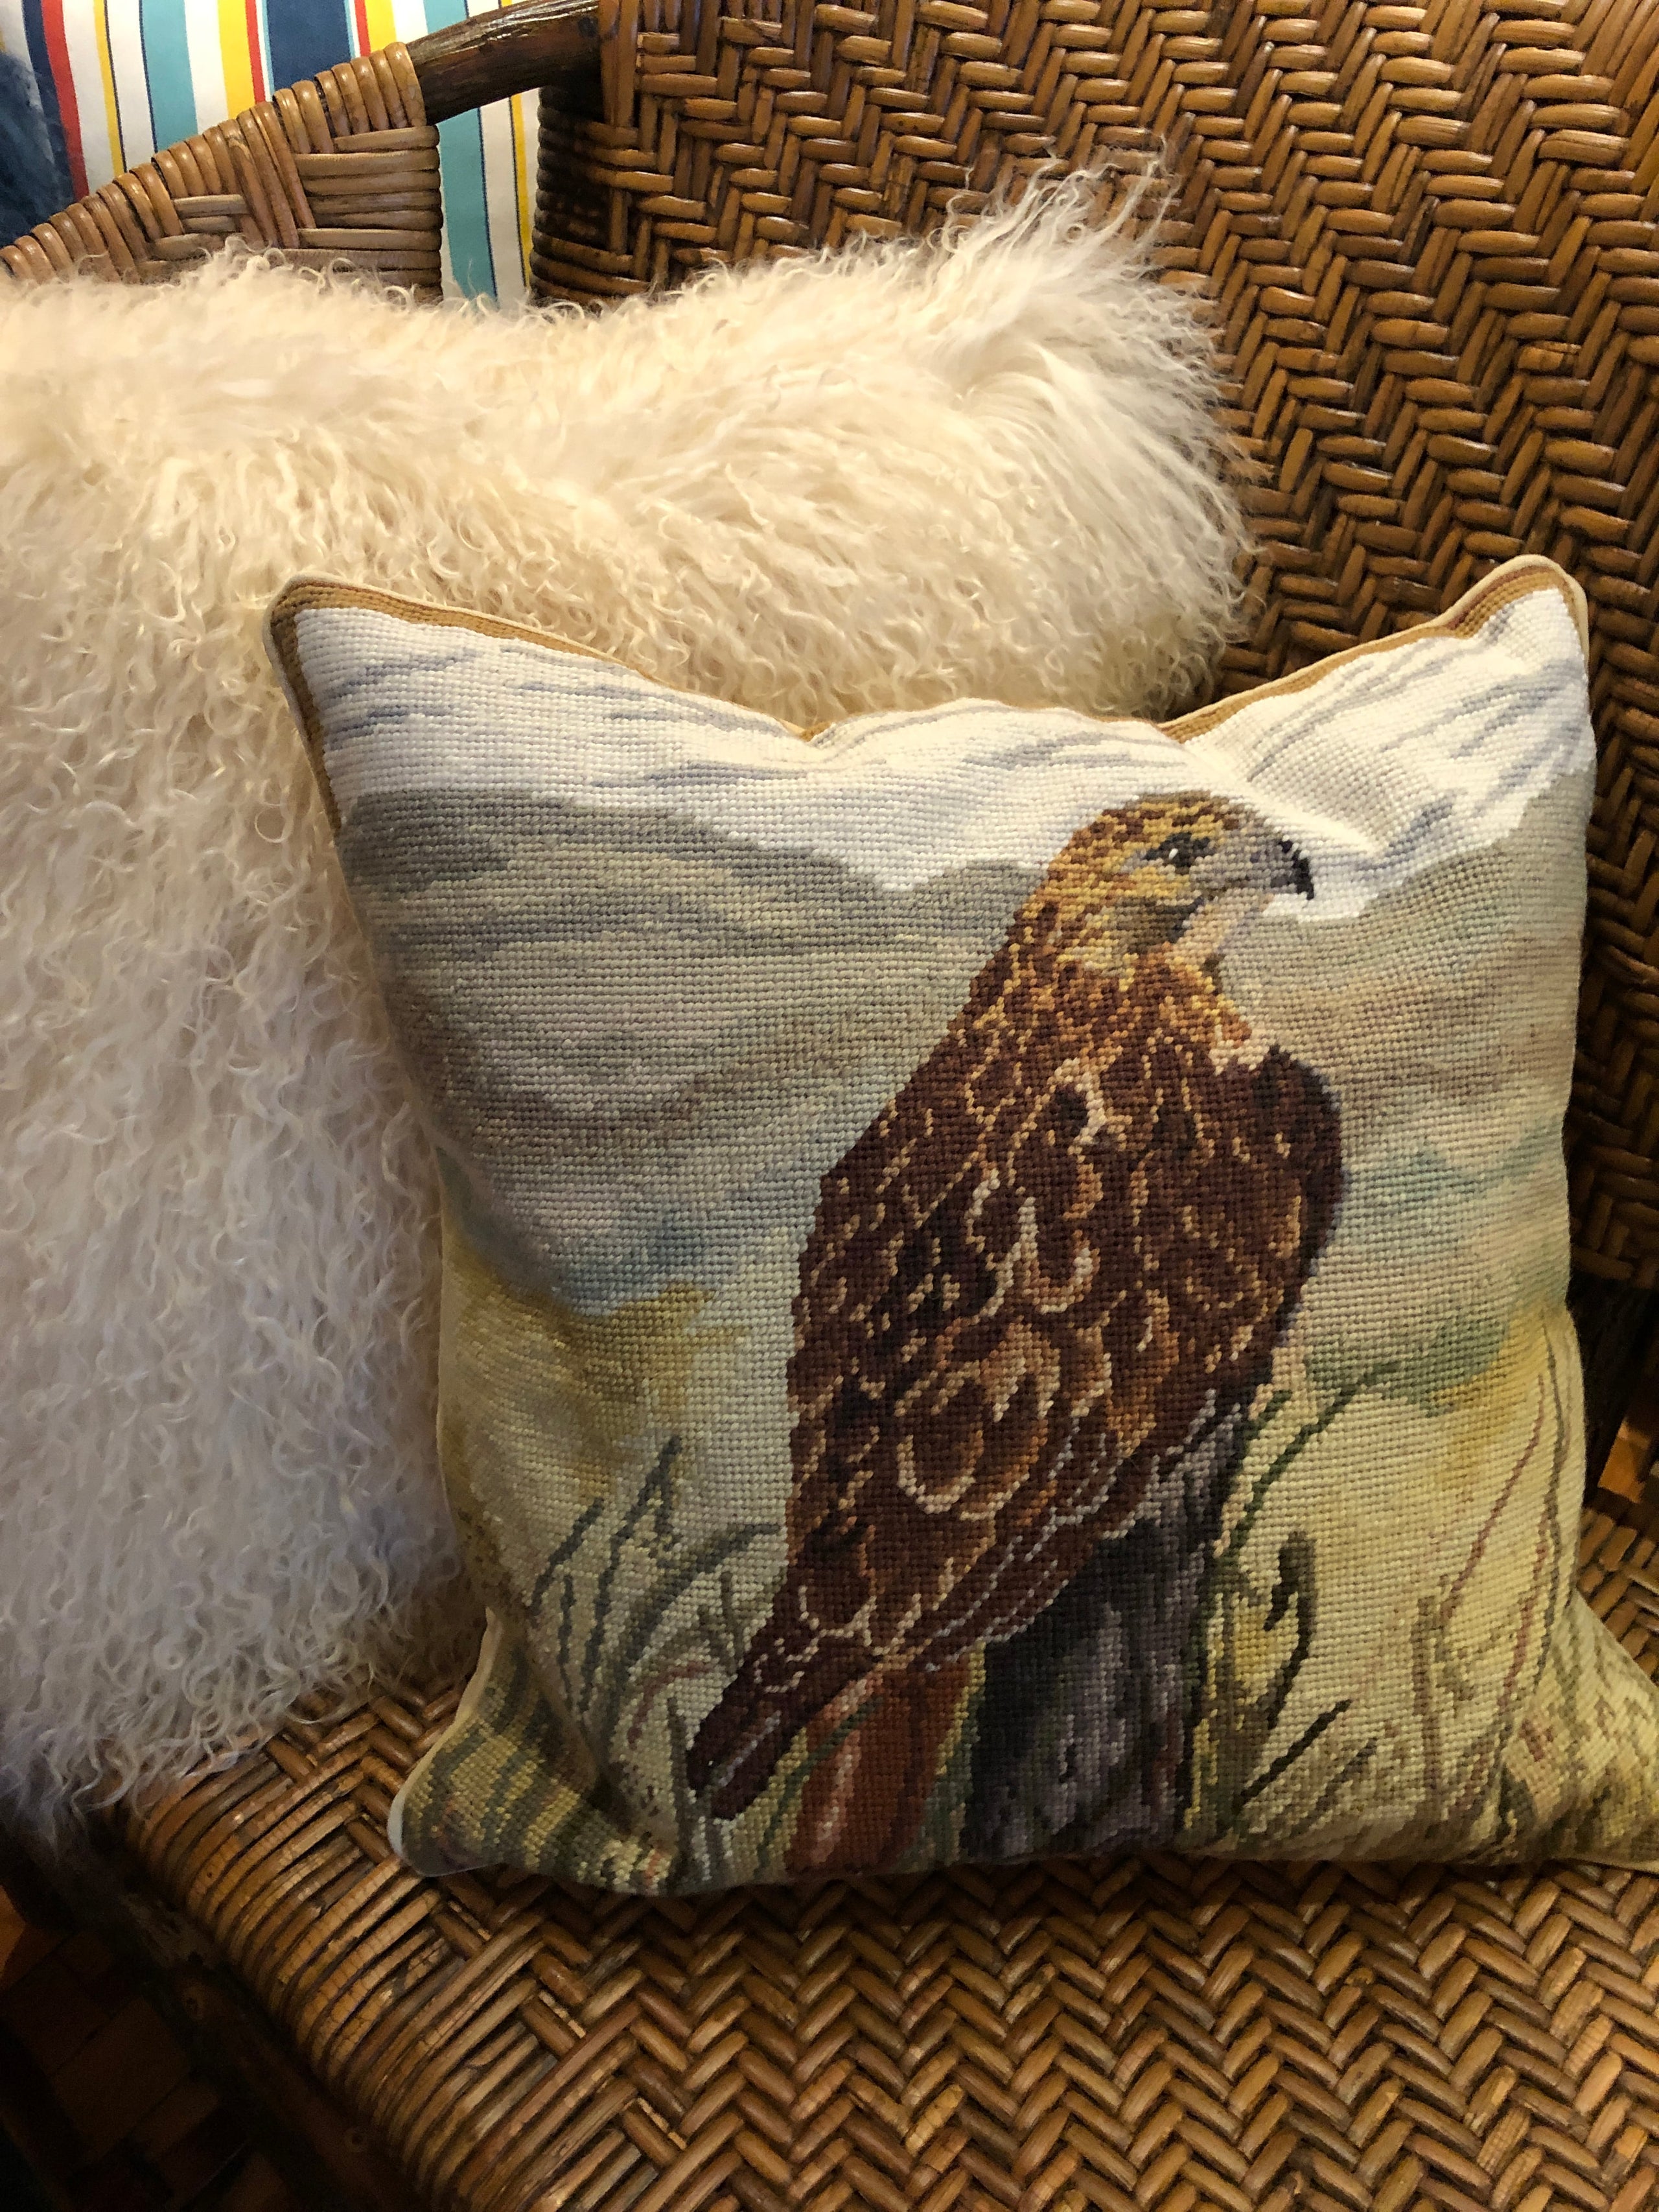 Needlepoint Pillows 100% Wool with Feather Down Inserts